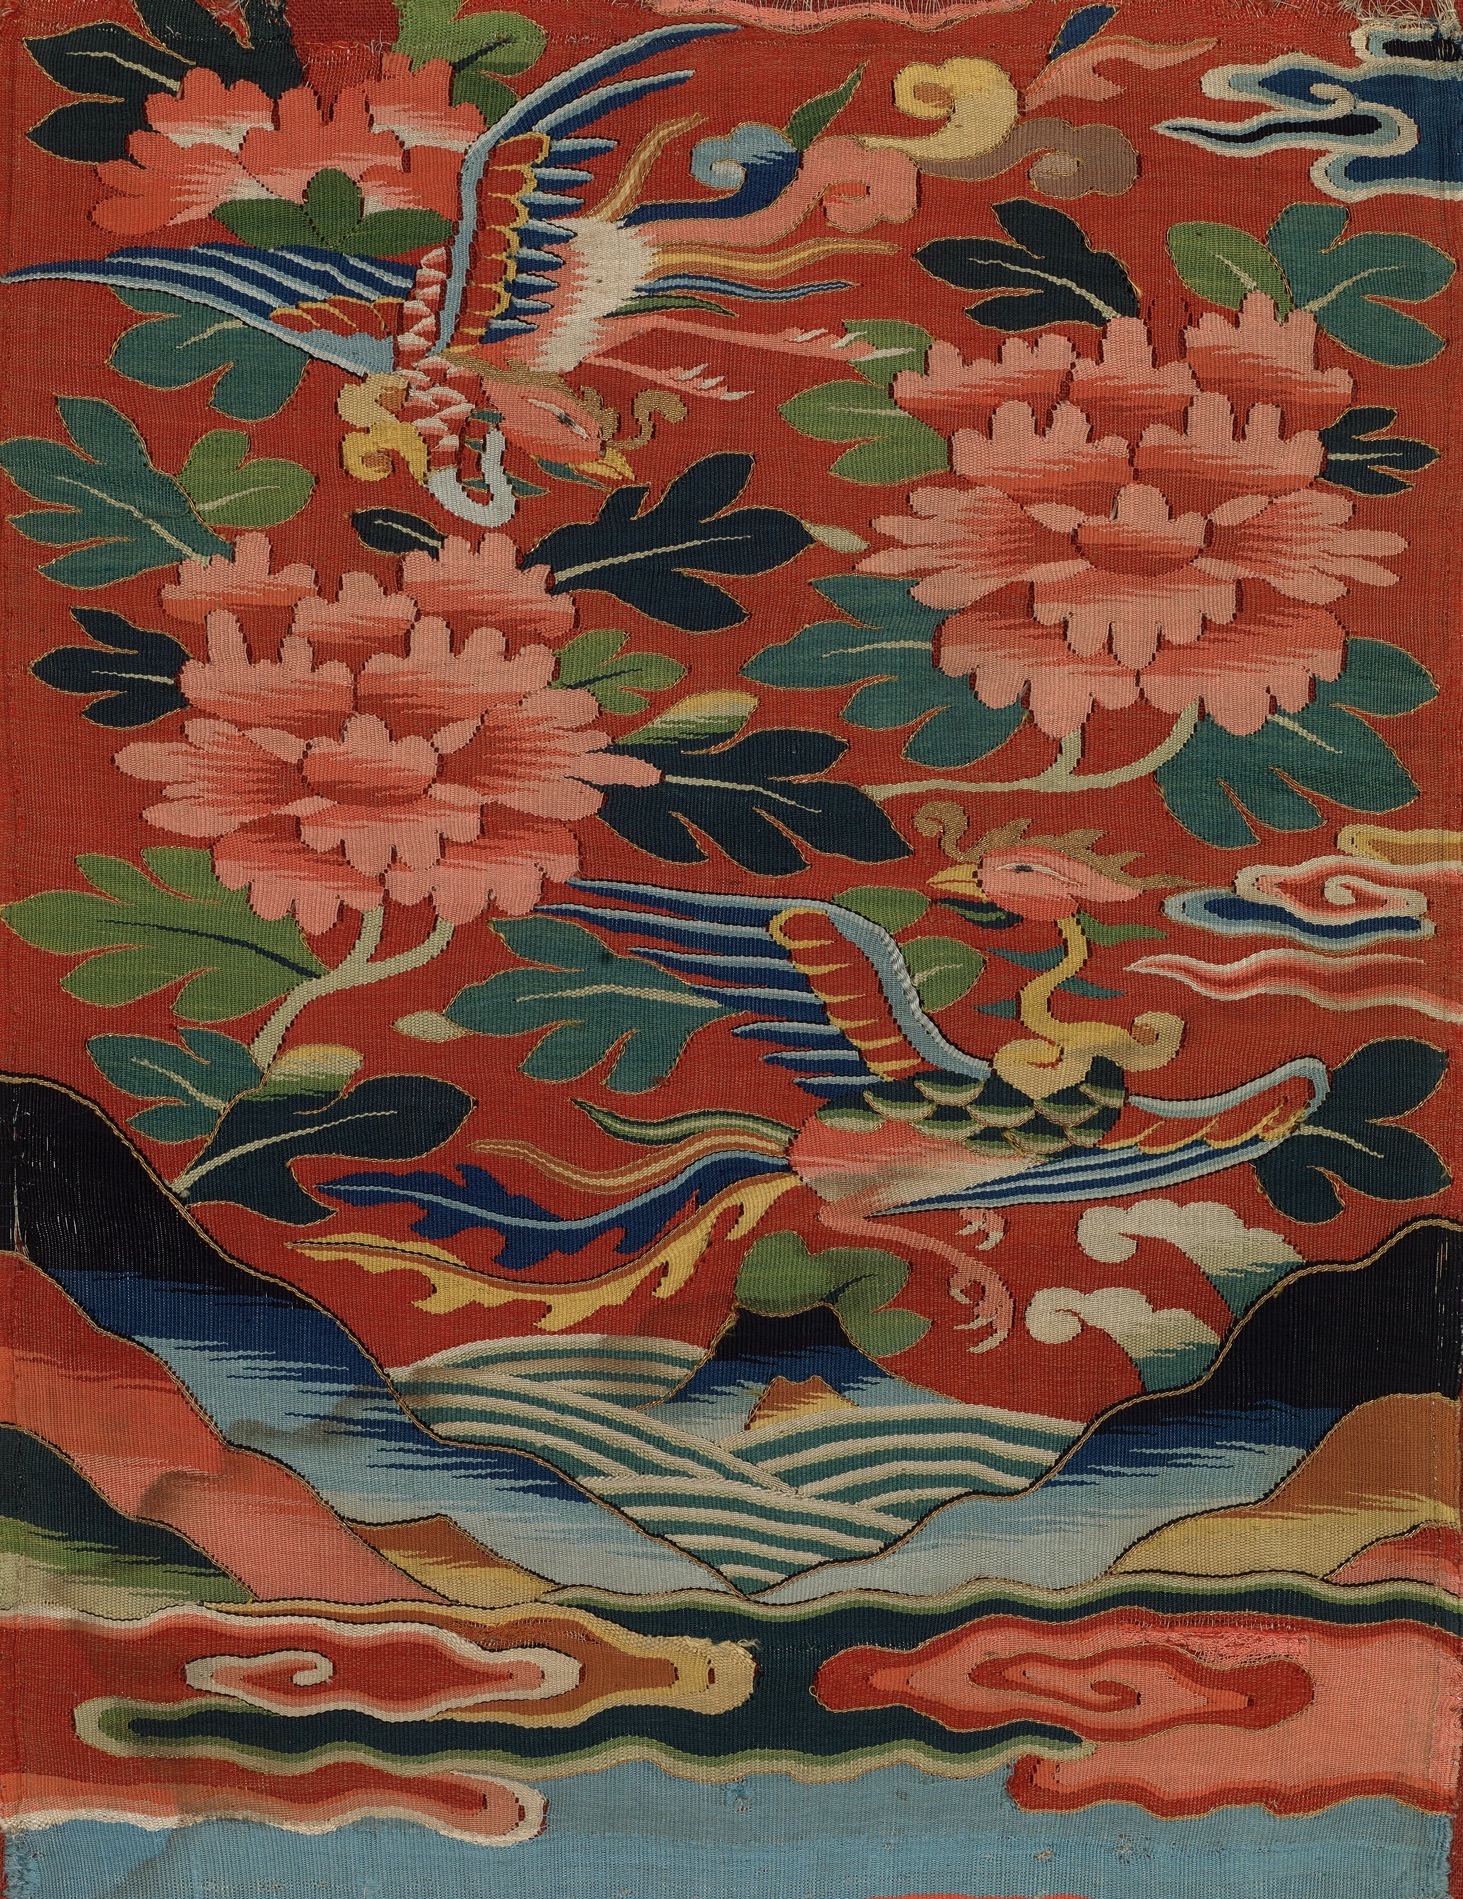 Pair of fenghuang amongst tree peonies, Ming dynasty, 15th/16th century. 36.5 x 27 cm